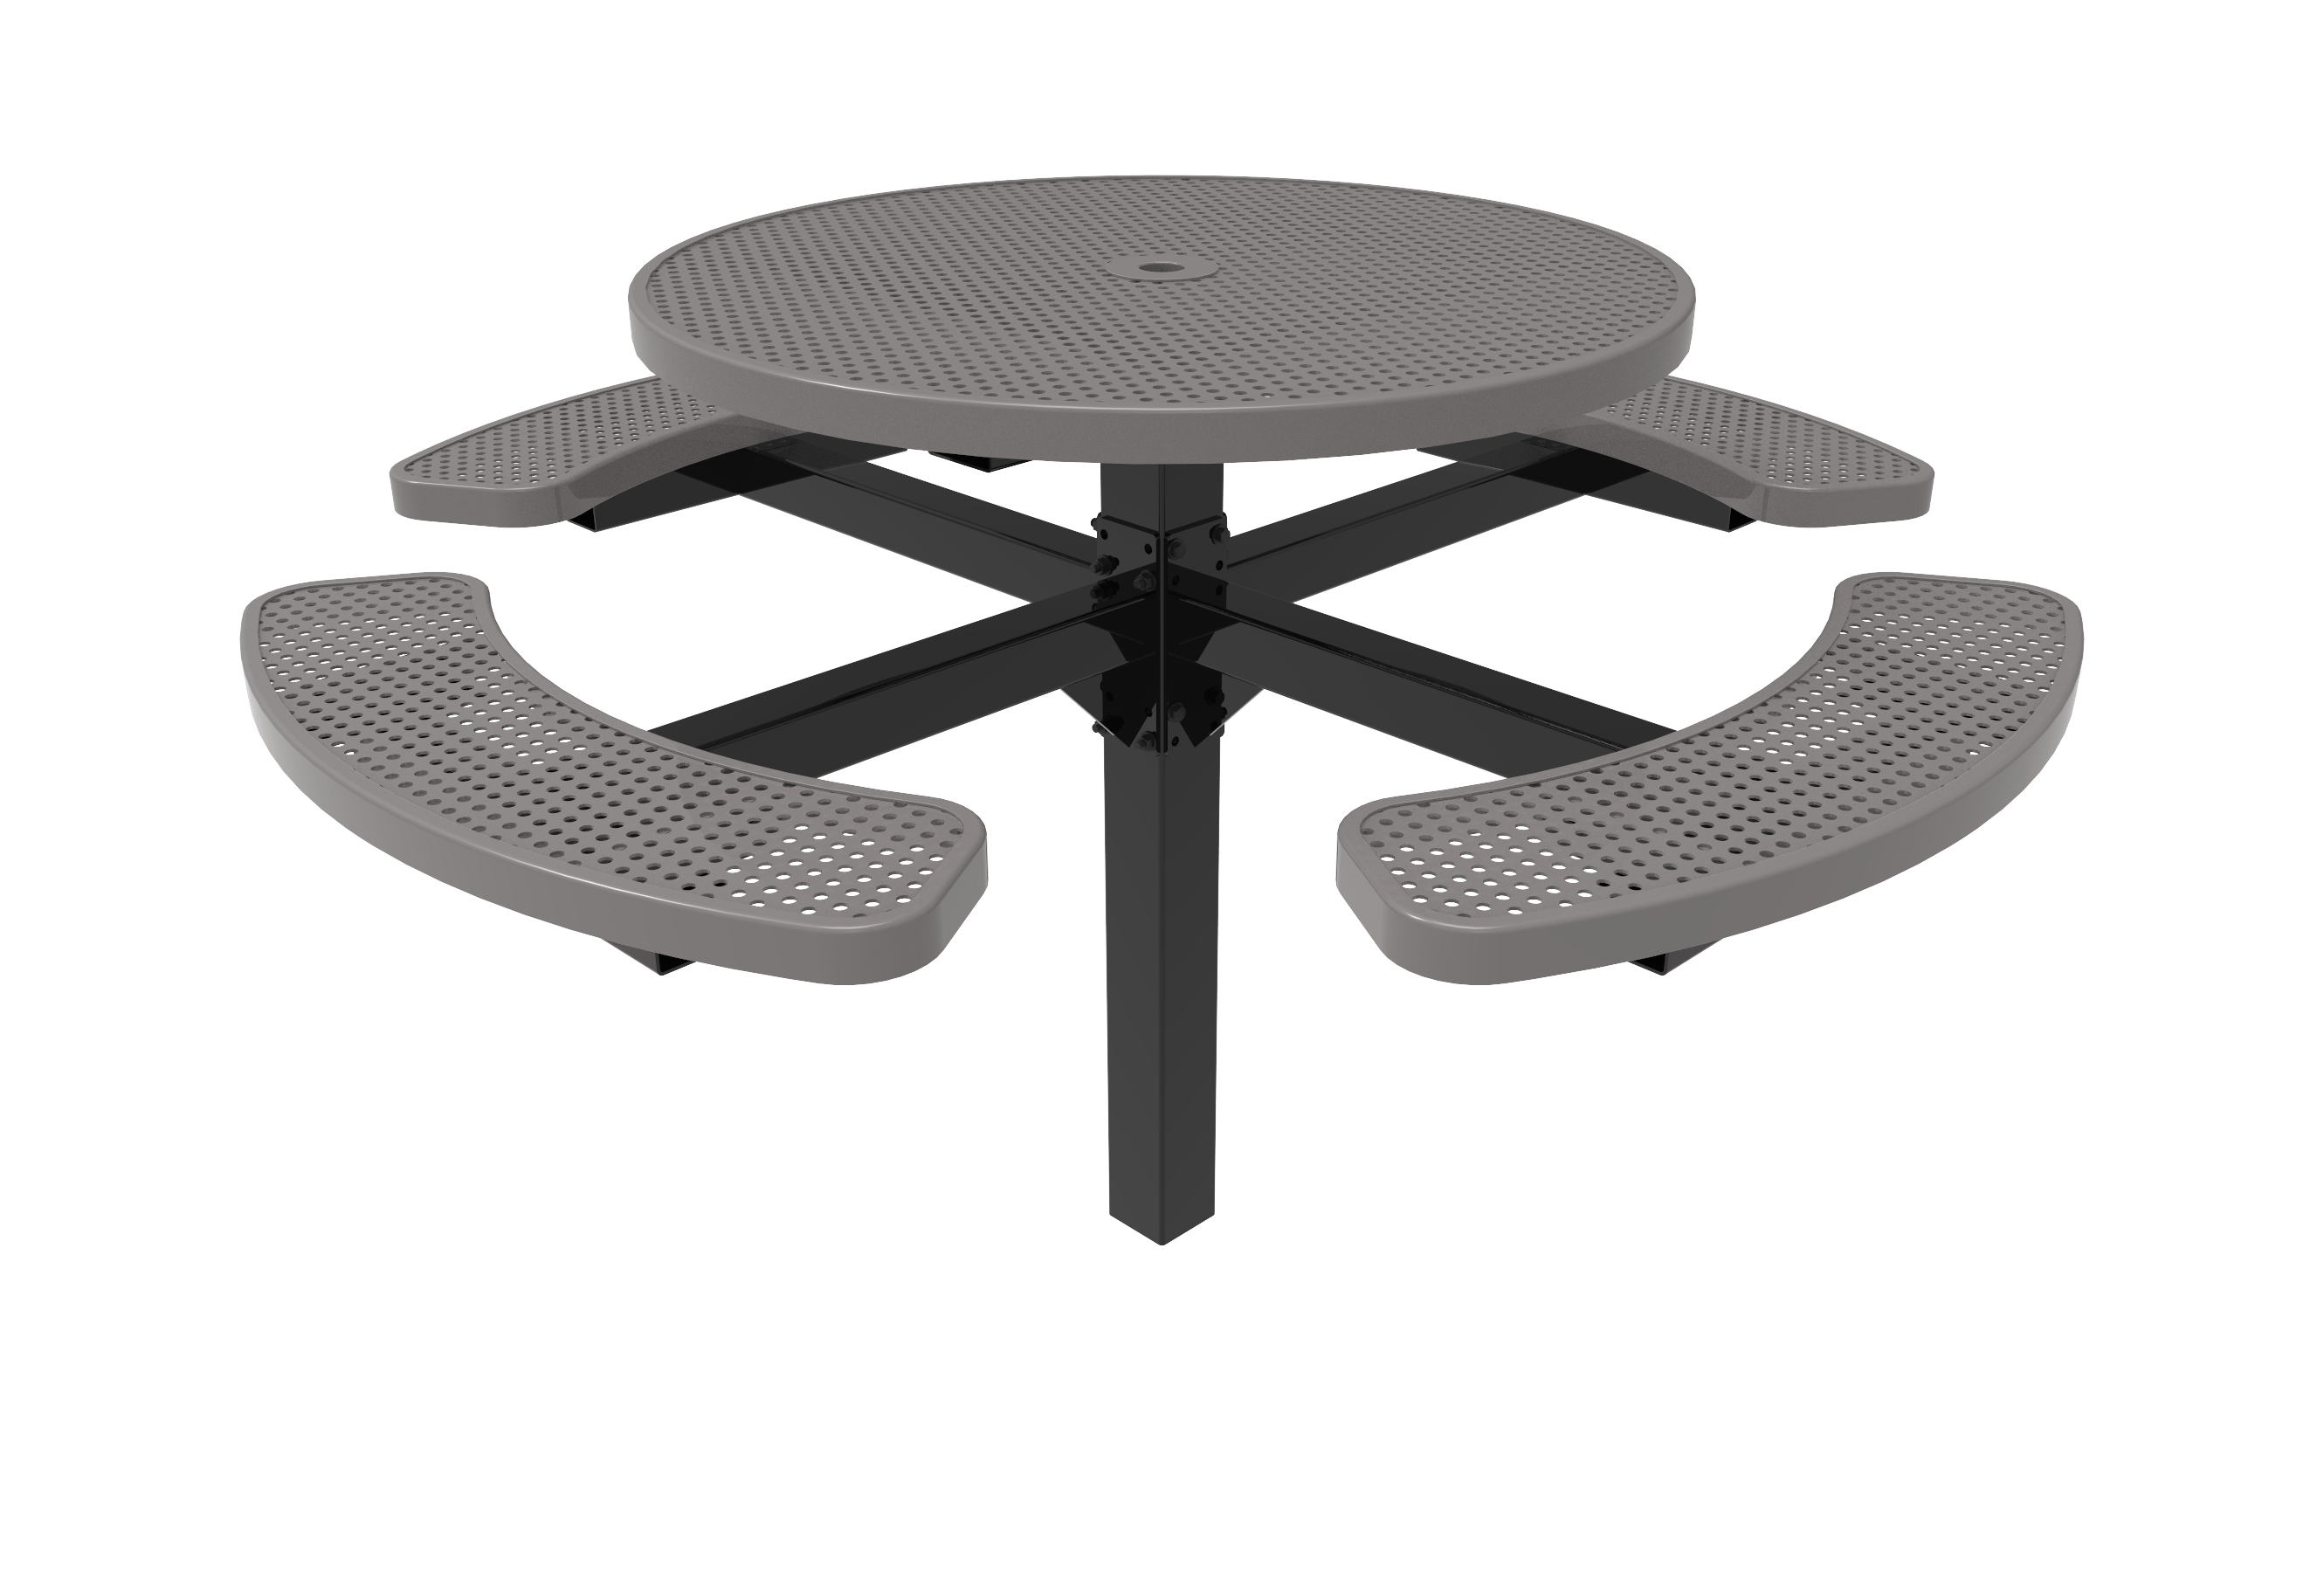 46″ Round Pedestal In Ground Table 4 Seat-Punch
TRD46-D-12-000
Industry Standard Finish
$1699.00
TRD46-B-12-000
Advantage Premium Finish
$2259.00
